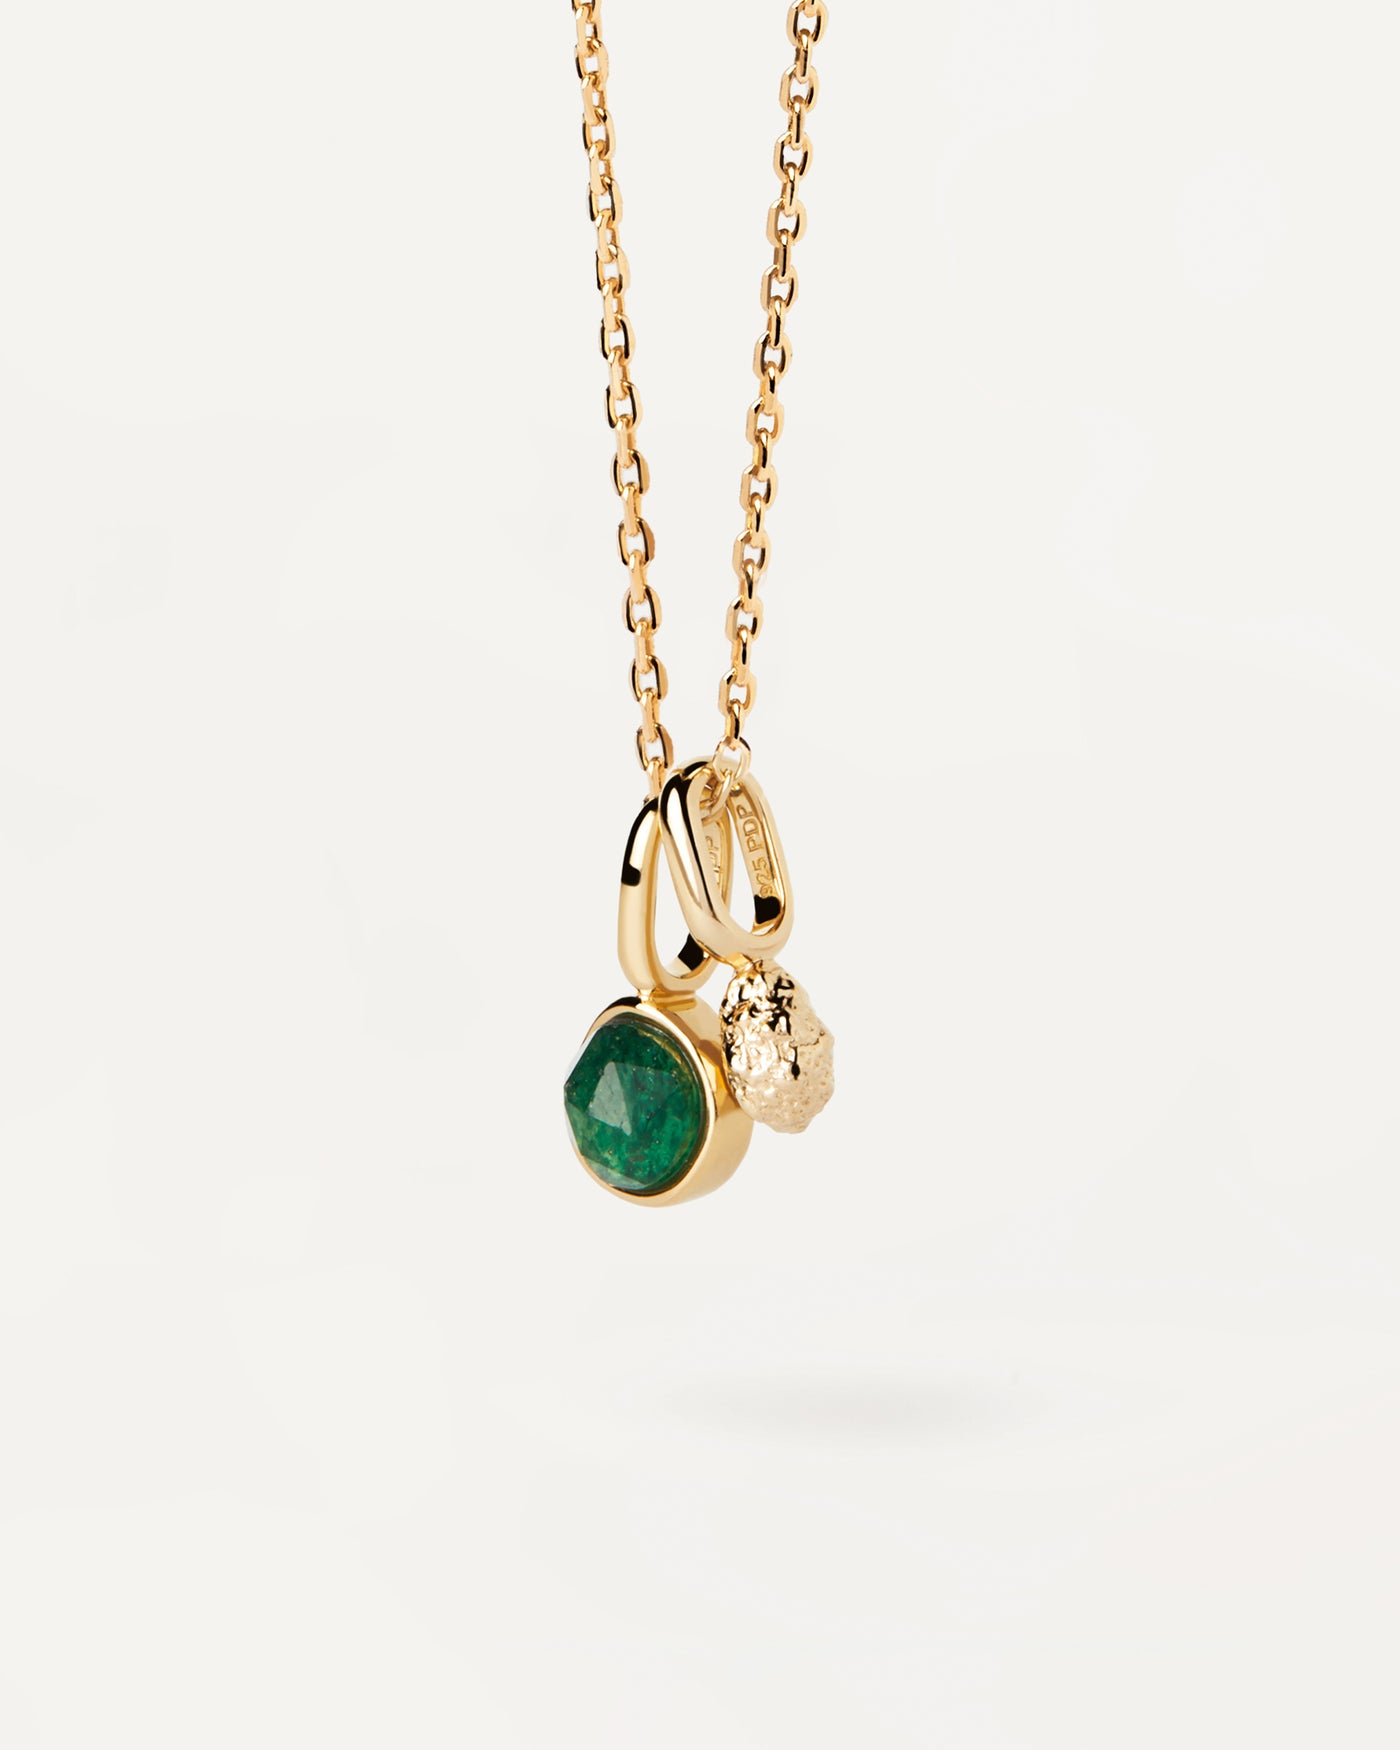 2023 Selection | Oasis Necklace. Gold-plated necklace with two drop pendants featuring pavé zirconia and green aventurine. Get the latest arrival from PDPAOLA. Place your order safely and get this Best Seller. Free Shipping.